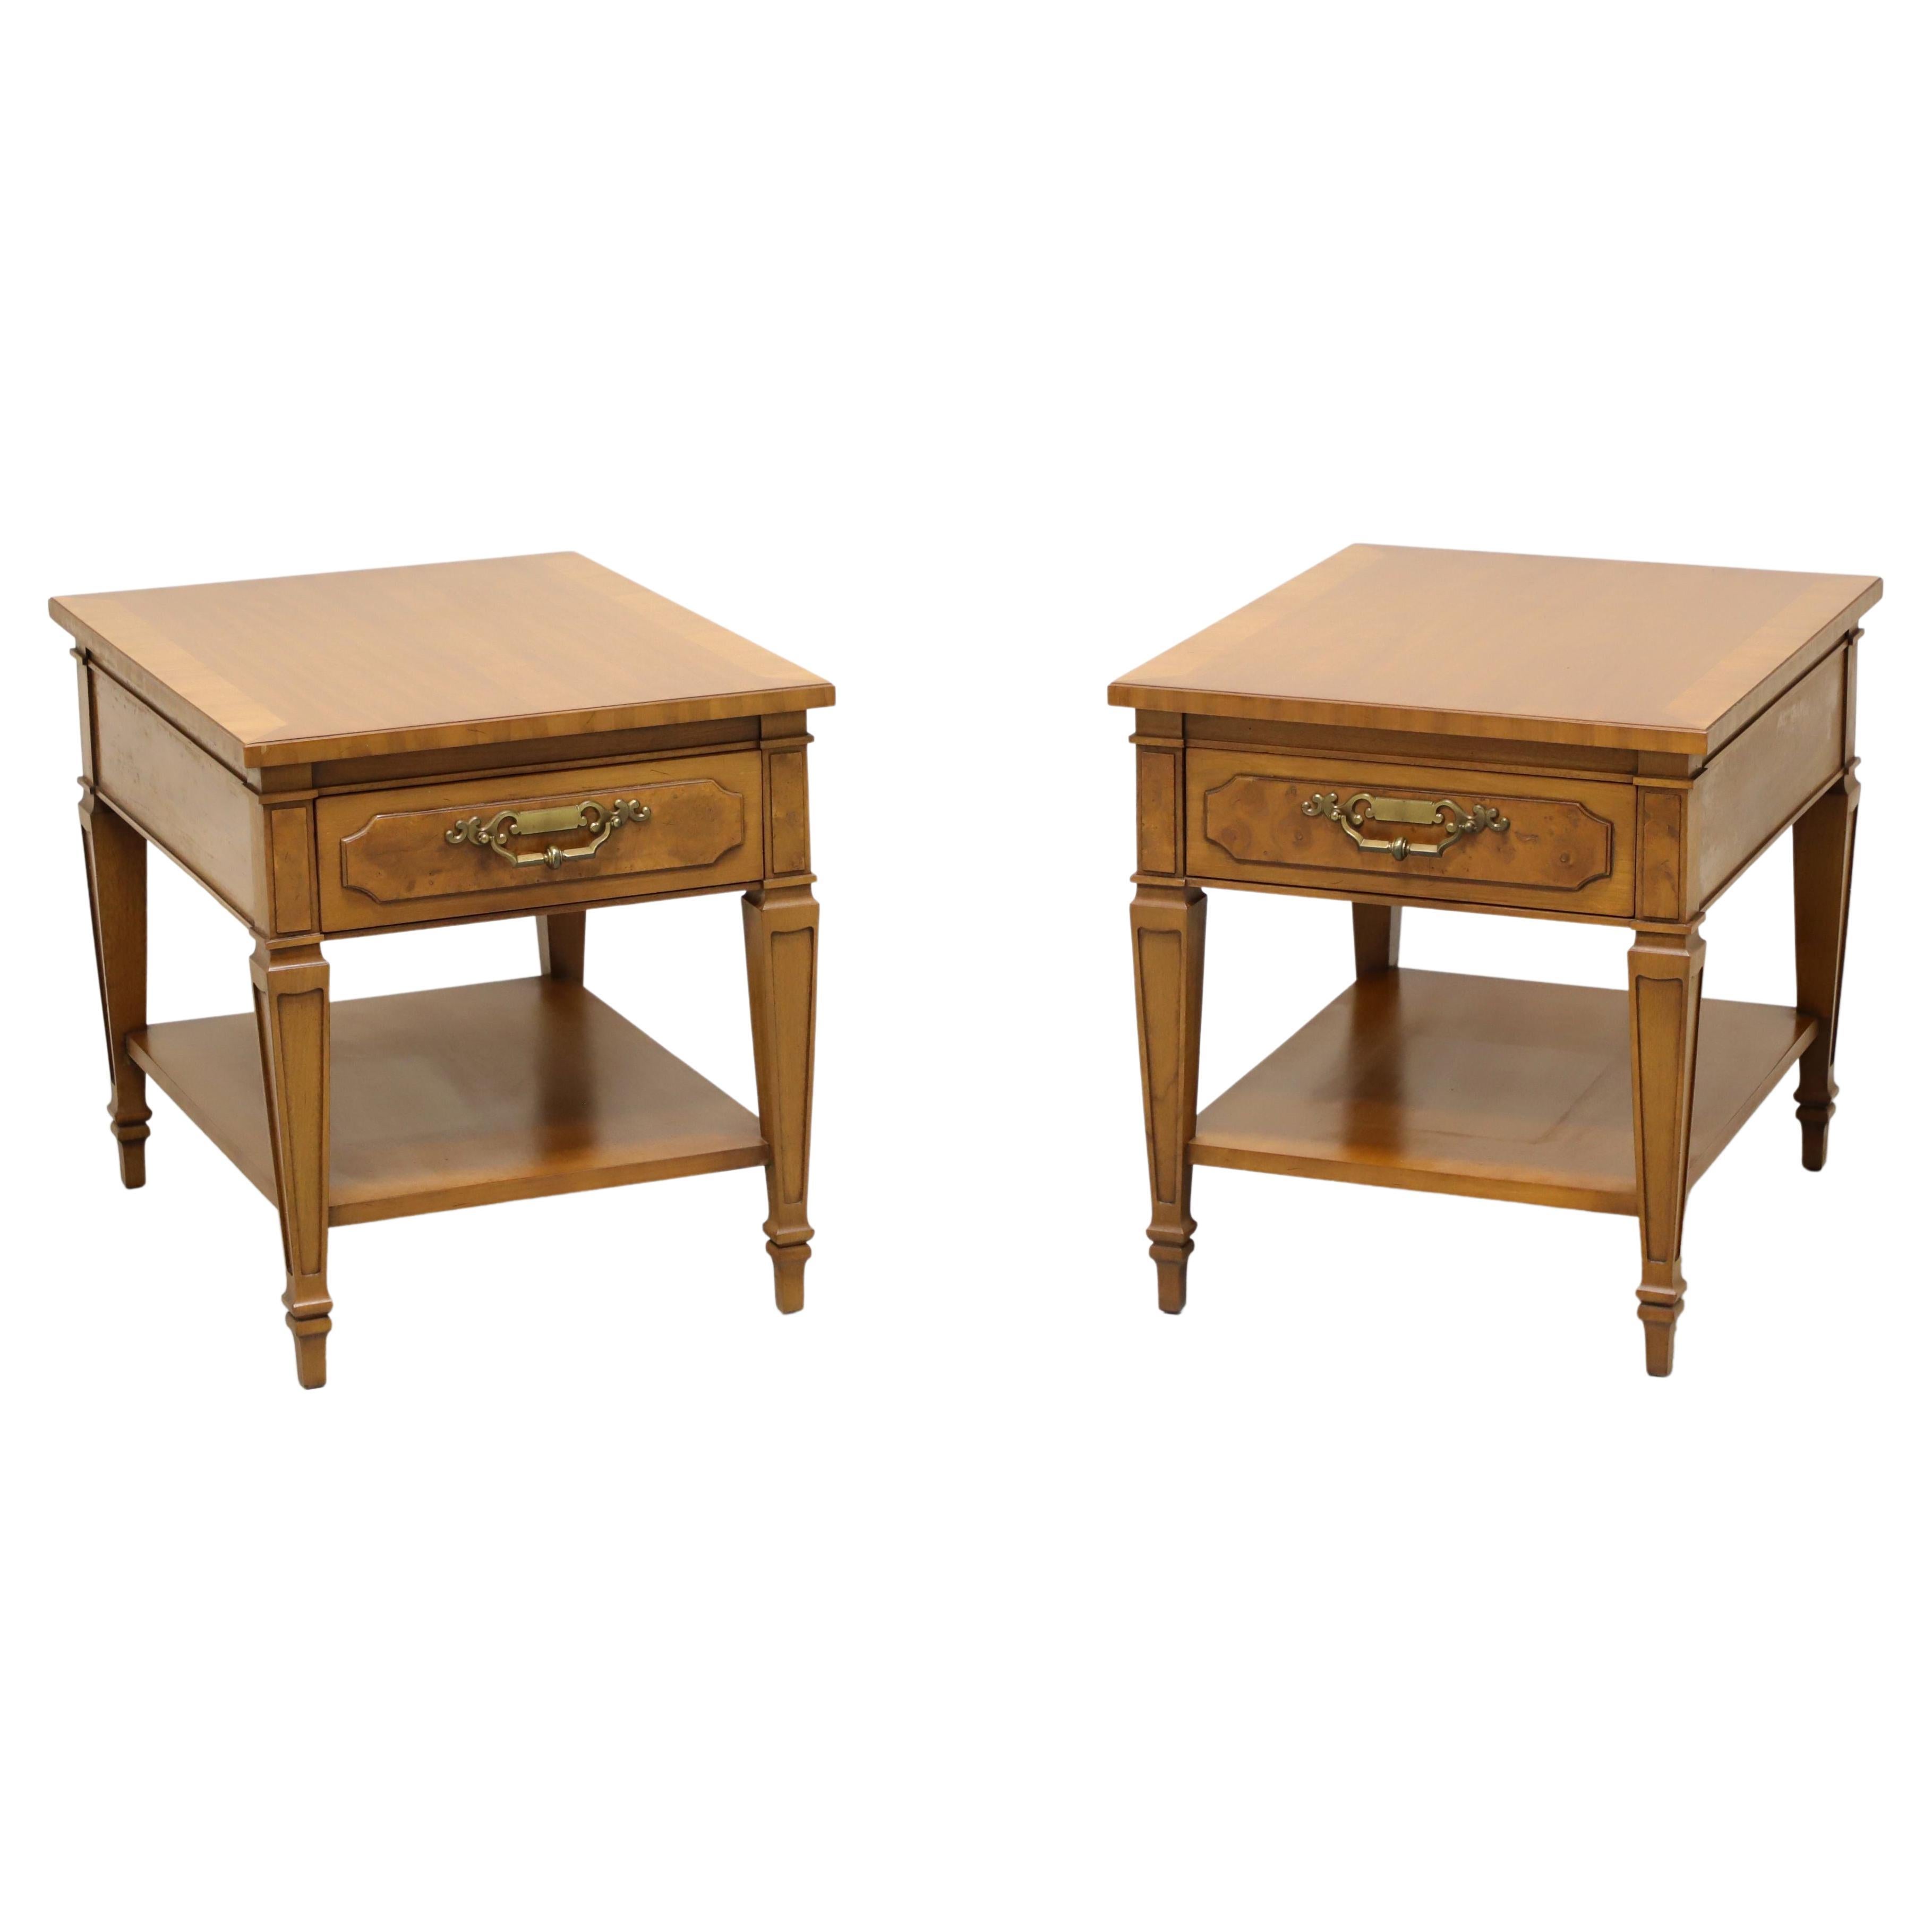 DREXEL HERITAGE "Repertoire" Mid 20th Century End / Side Tables - Pair